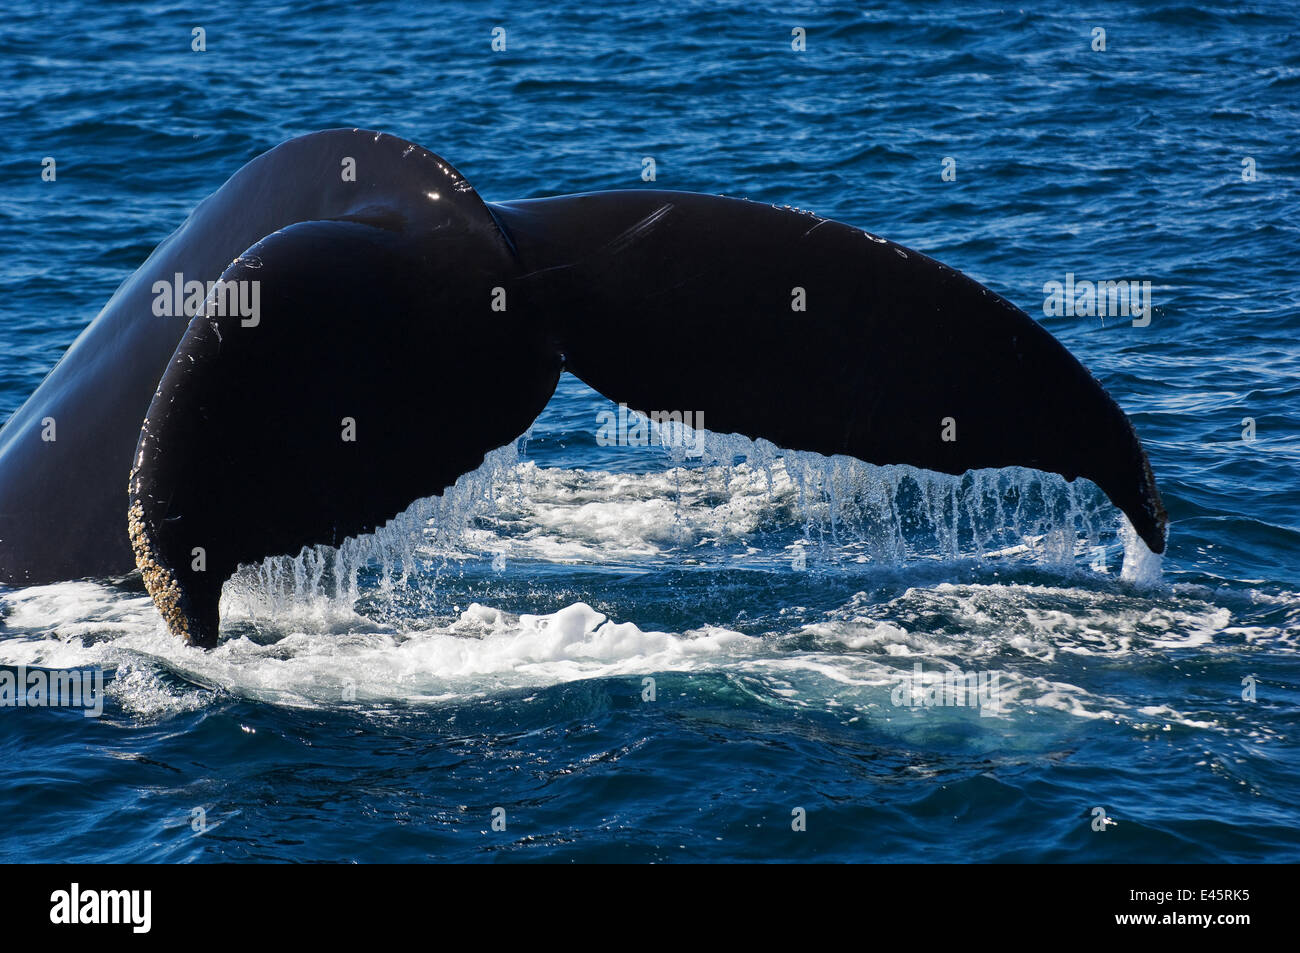 Humpback whale (Megaptera novaeangliae) fluking - lifting the tail in the air before a dive, Sea of Cortez, Baja California, Mexico Stock Photo